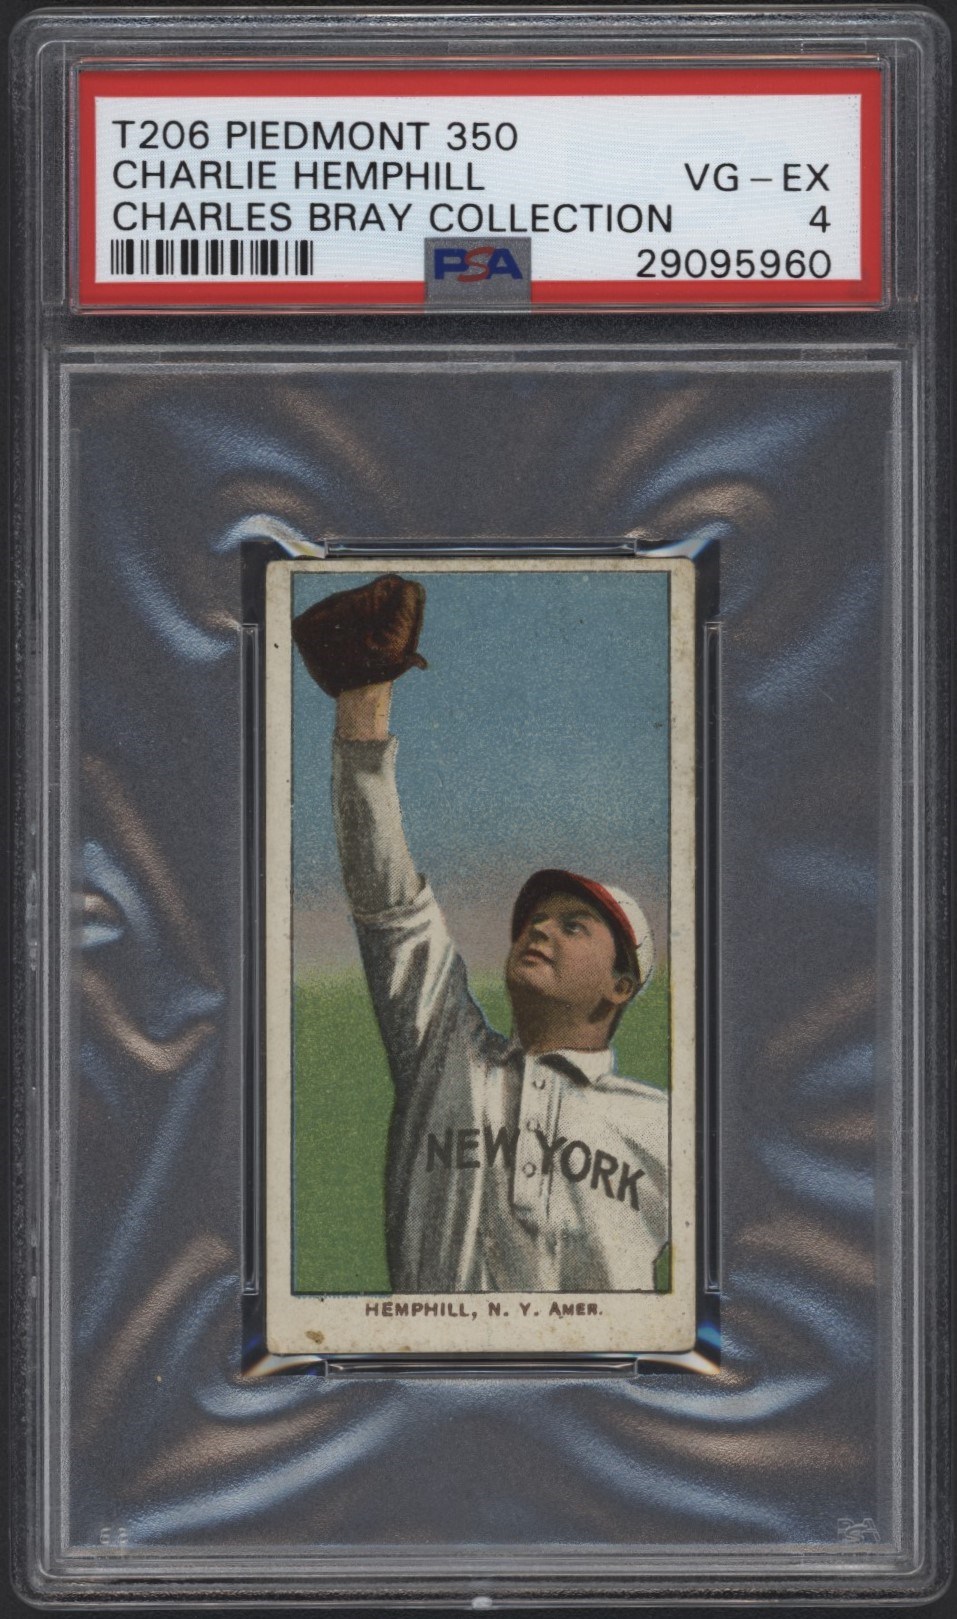 - T206 Piedmont 350 Charlie Hemphill PSA 4 From the Charles Bray Collection